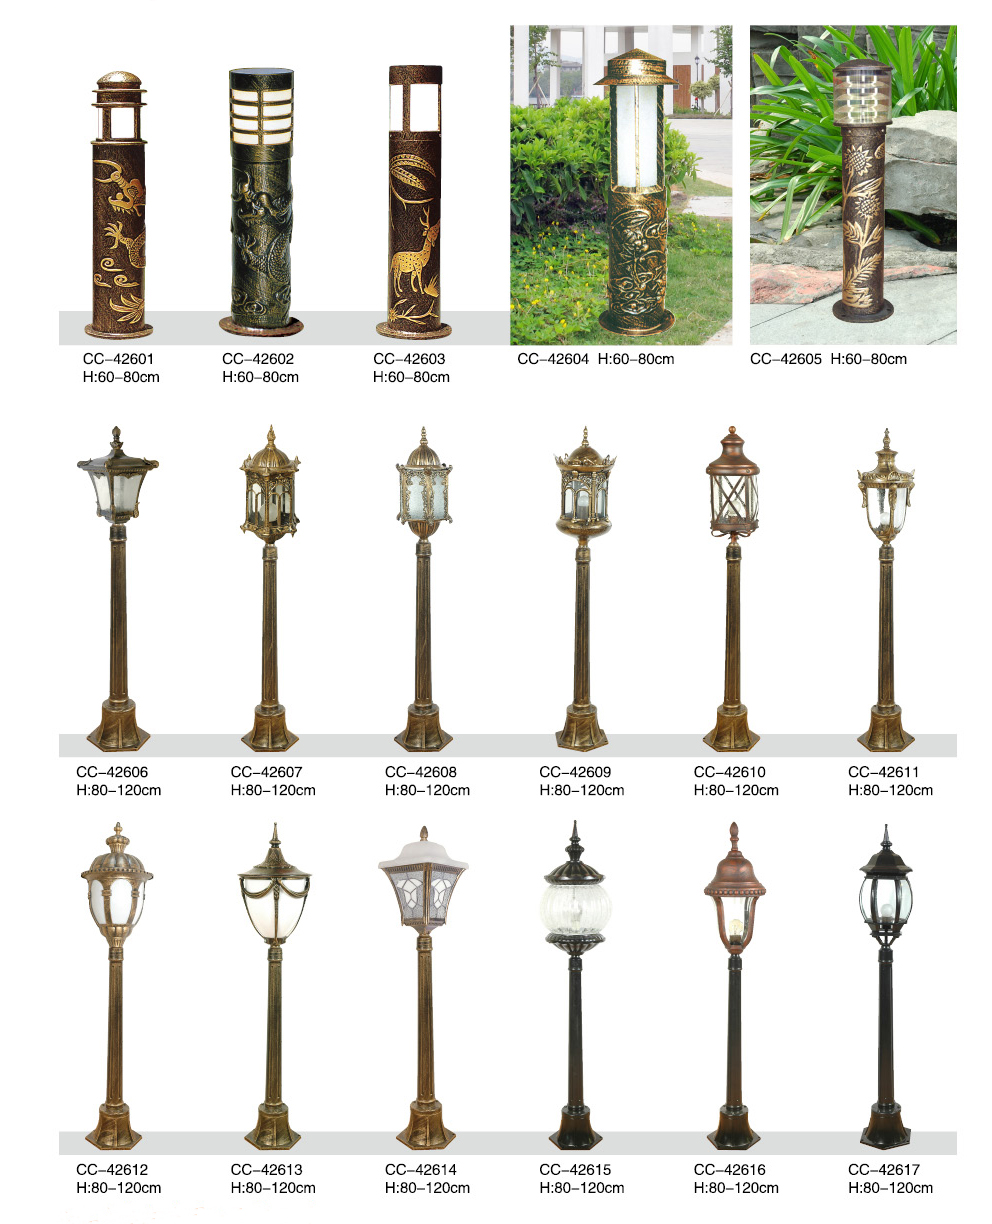 More style classical lawn lamp